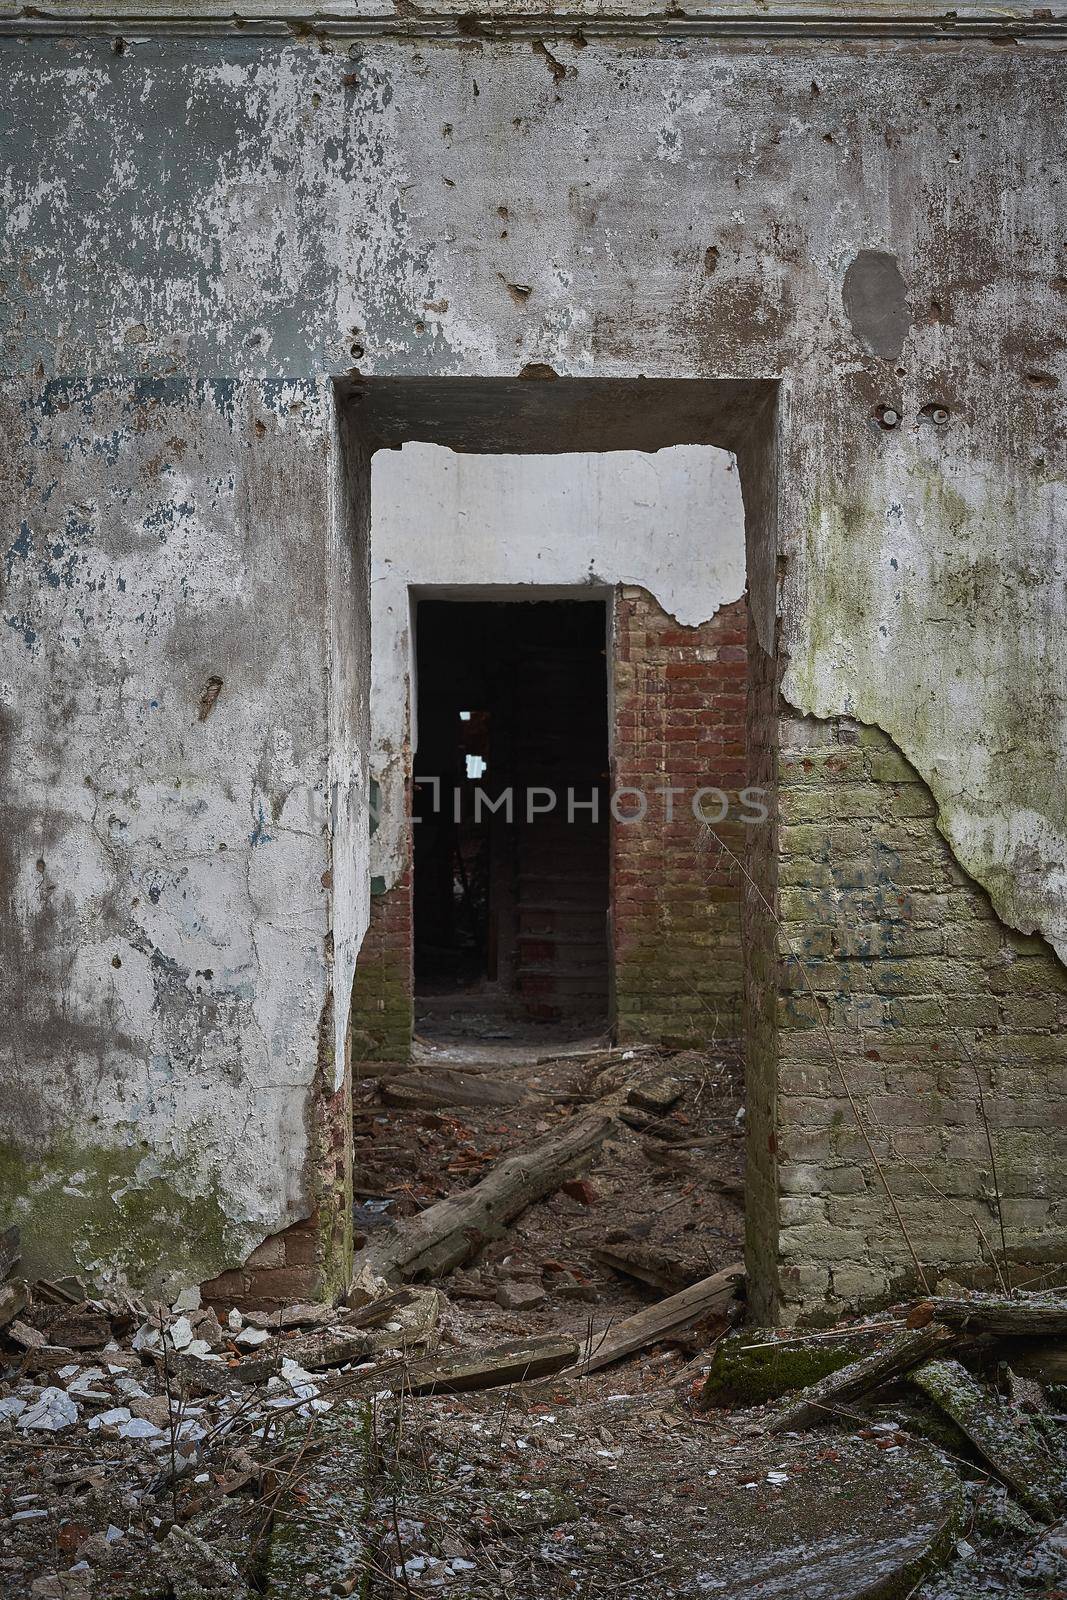 Apocalyptic picture. Urban decay interior, abandoned building, old textured aged wall, ruined background, grunge, rusty. Concept of destruction, ruin